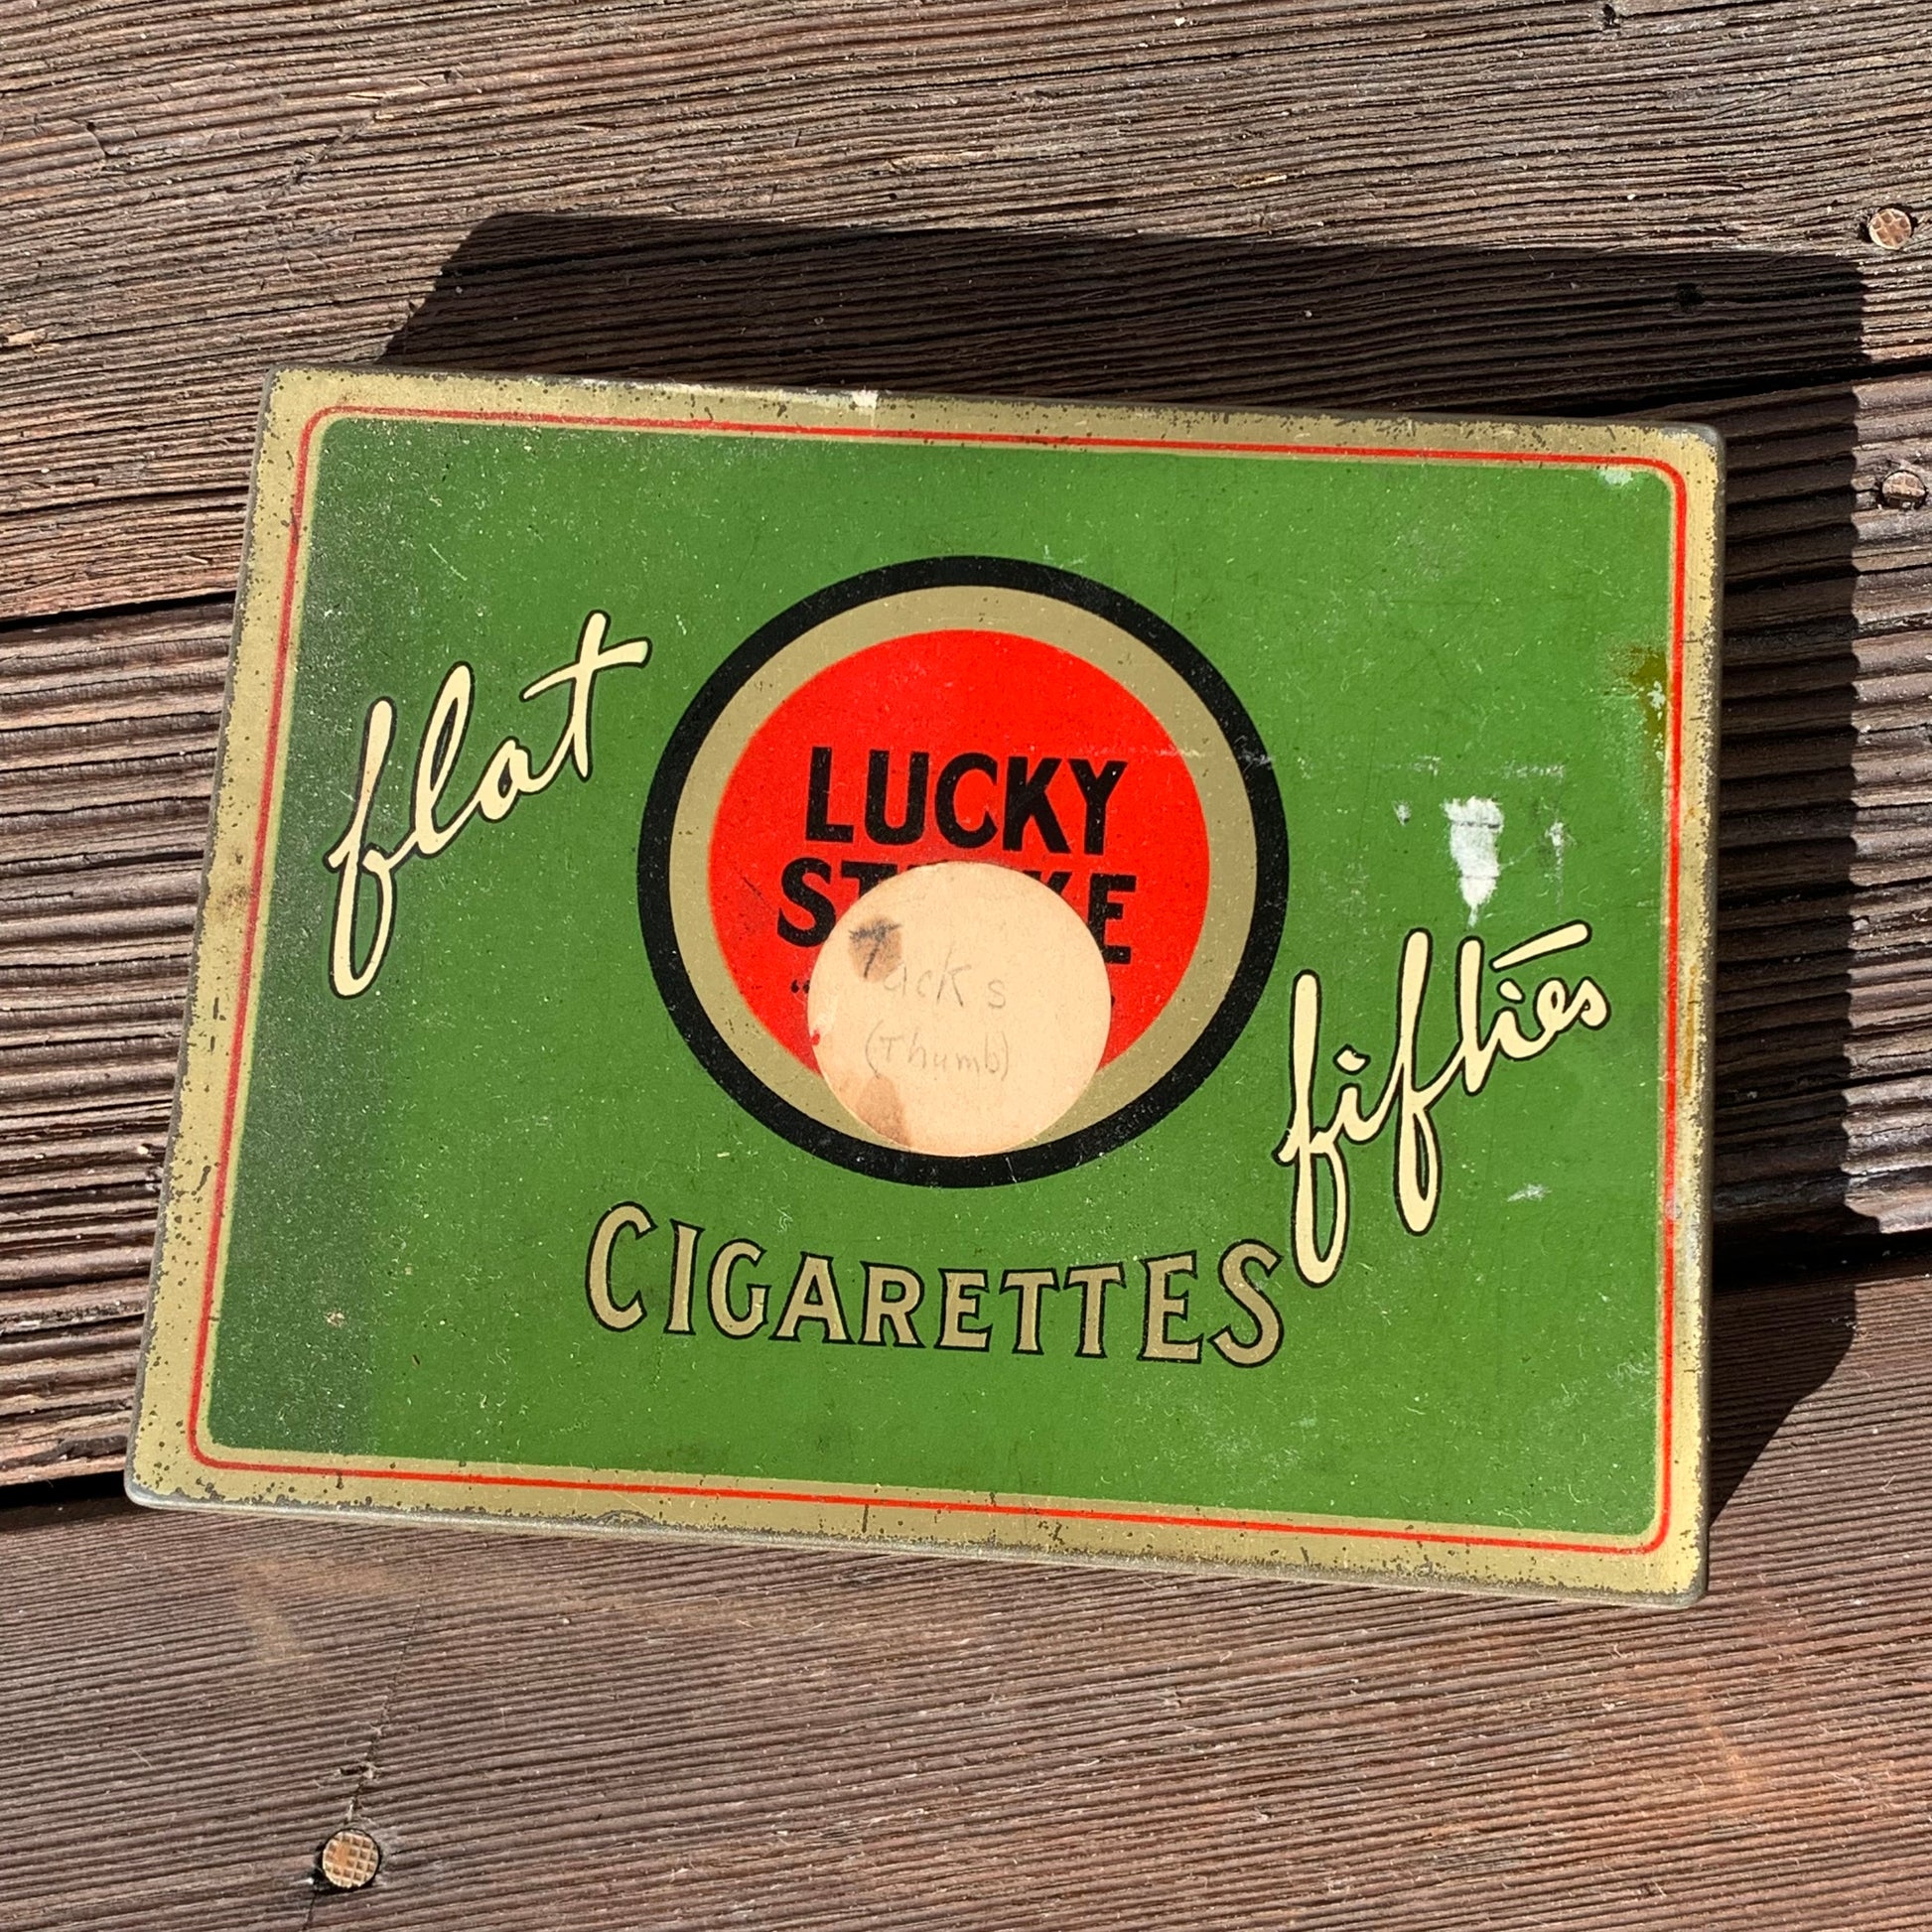 Vintage Lucky Strike Cigarette Tin Flat Fifties "It's Toasted" Tobacco Box